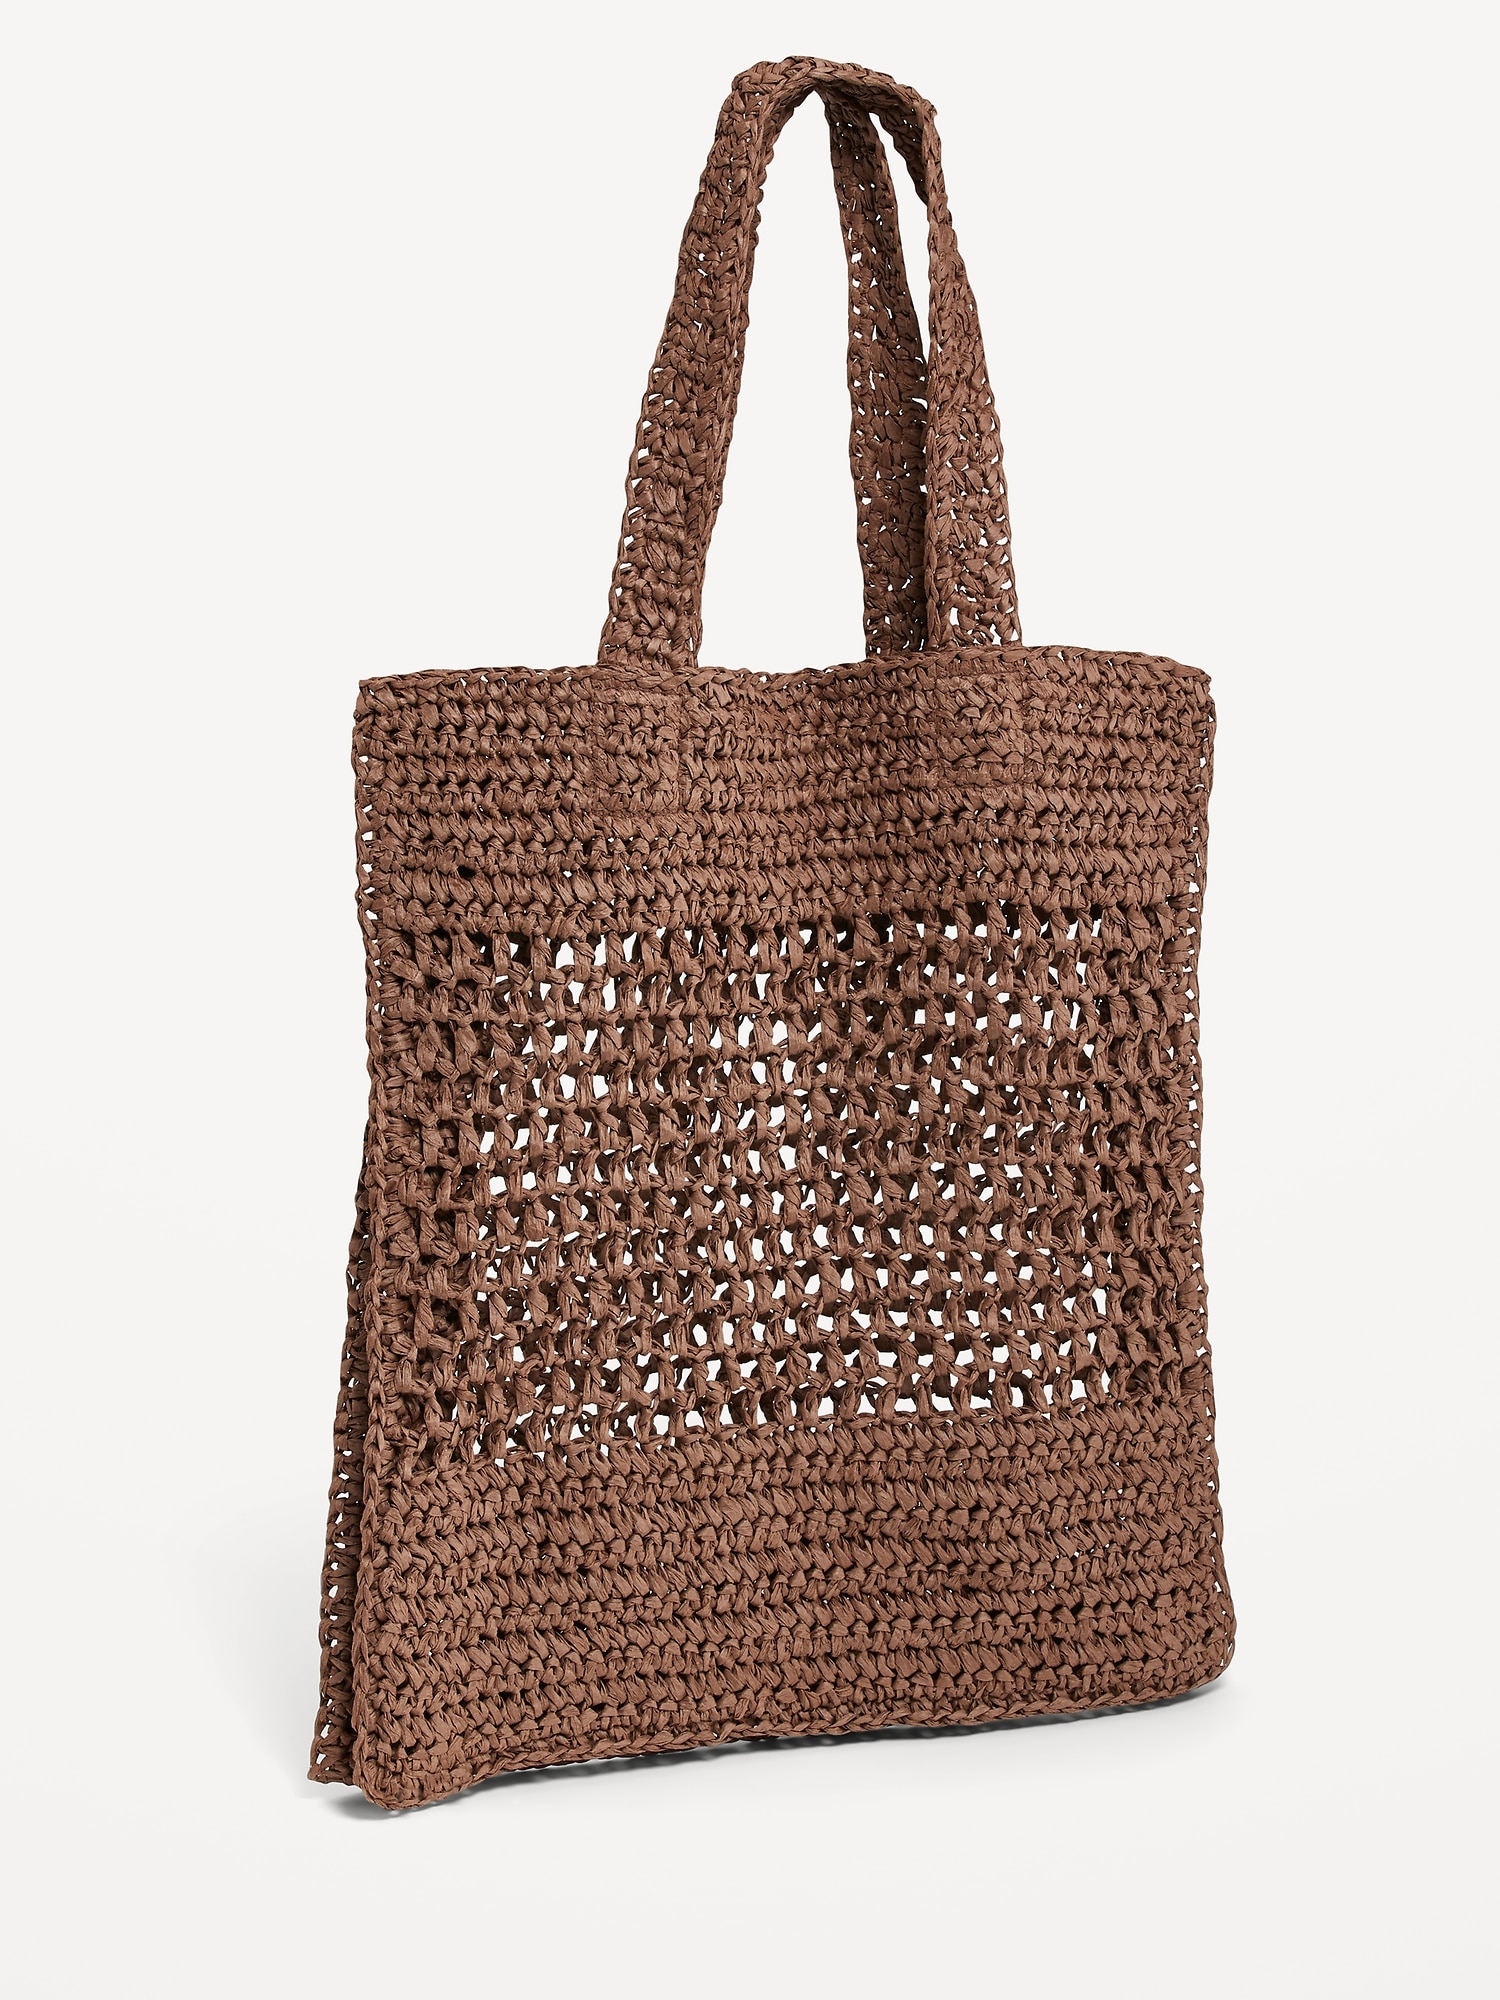 Old Navy Straw-Paper Crochet Tote Bag for Women brown. 1